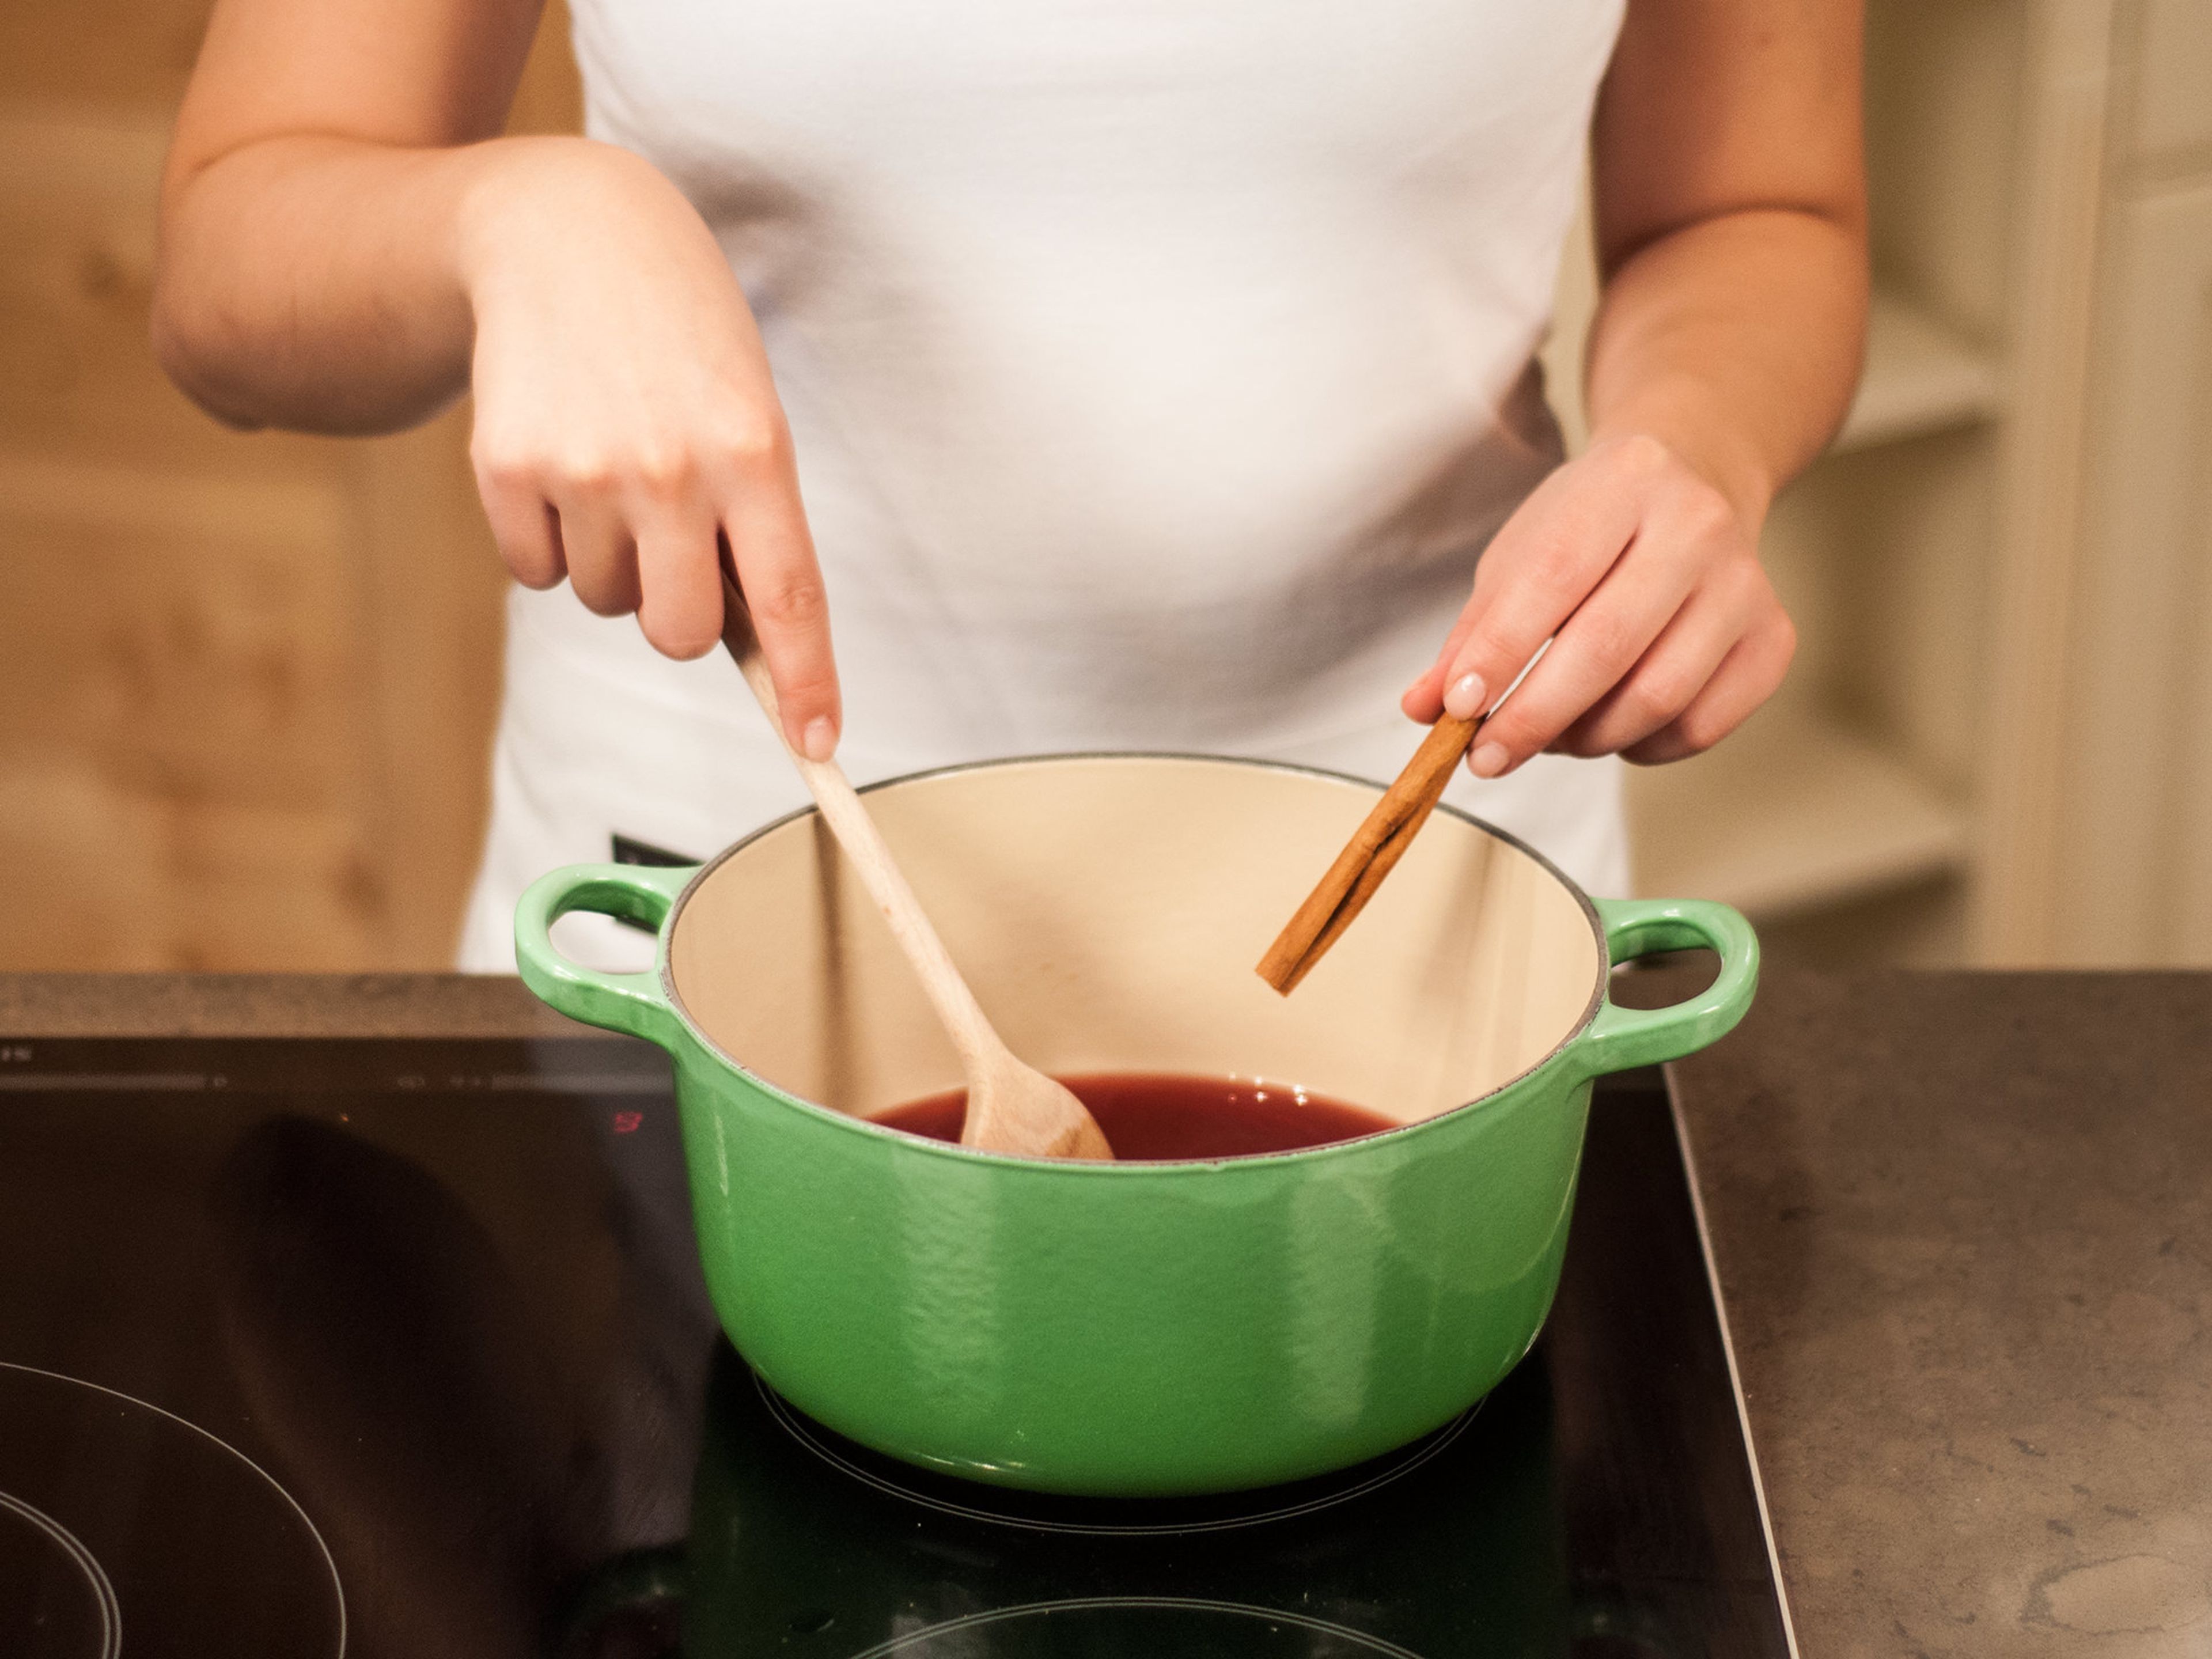 Before serving, prepare the sauce. Add red wine, raspberry brandy, the remaining sugar, and a cinnamon stick to a saucepan. Bring everything to a boil and let simmer until the sugar has fully dissolved.